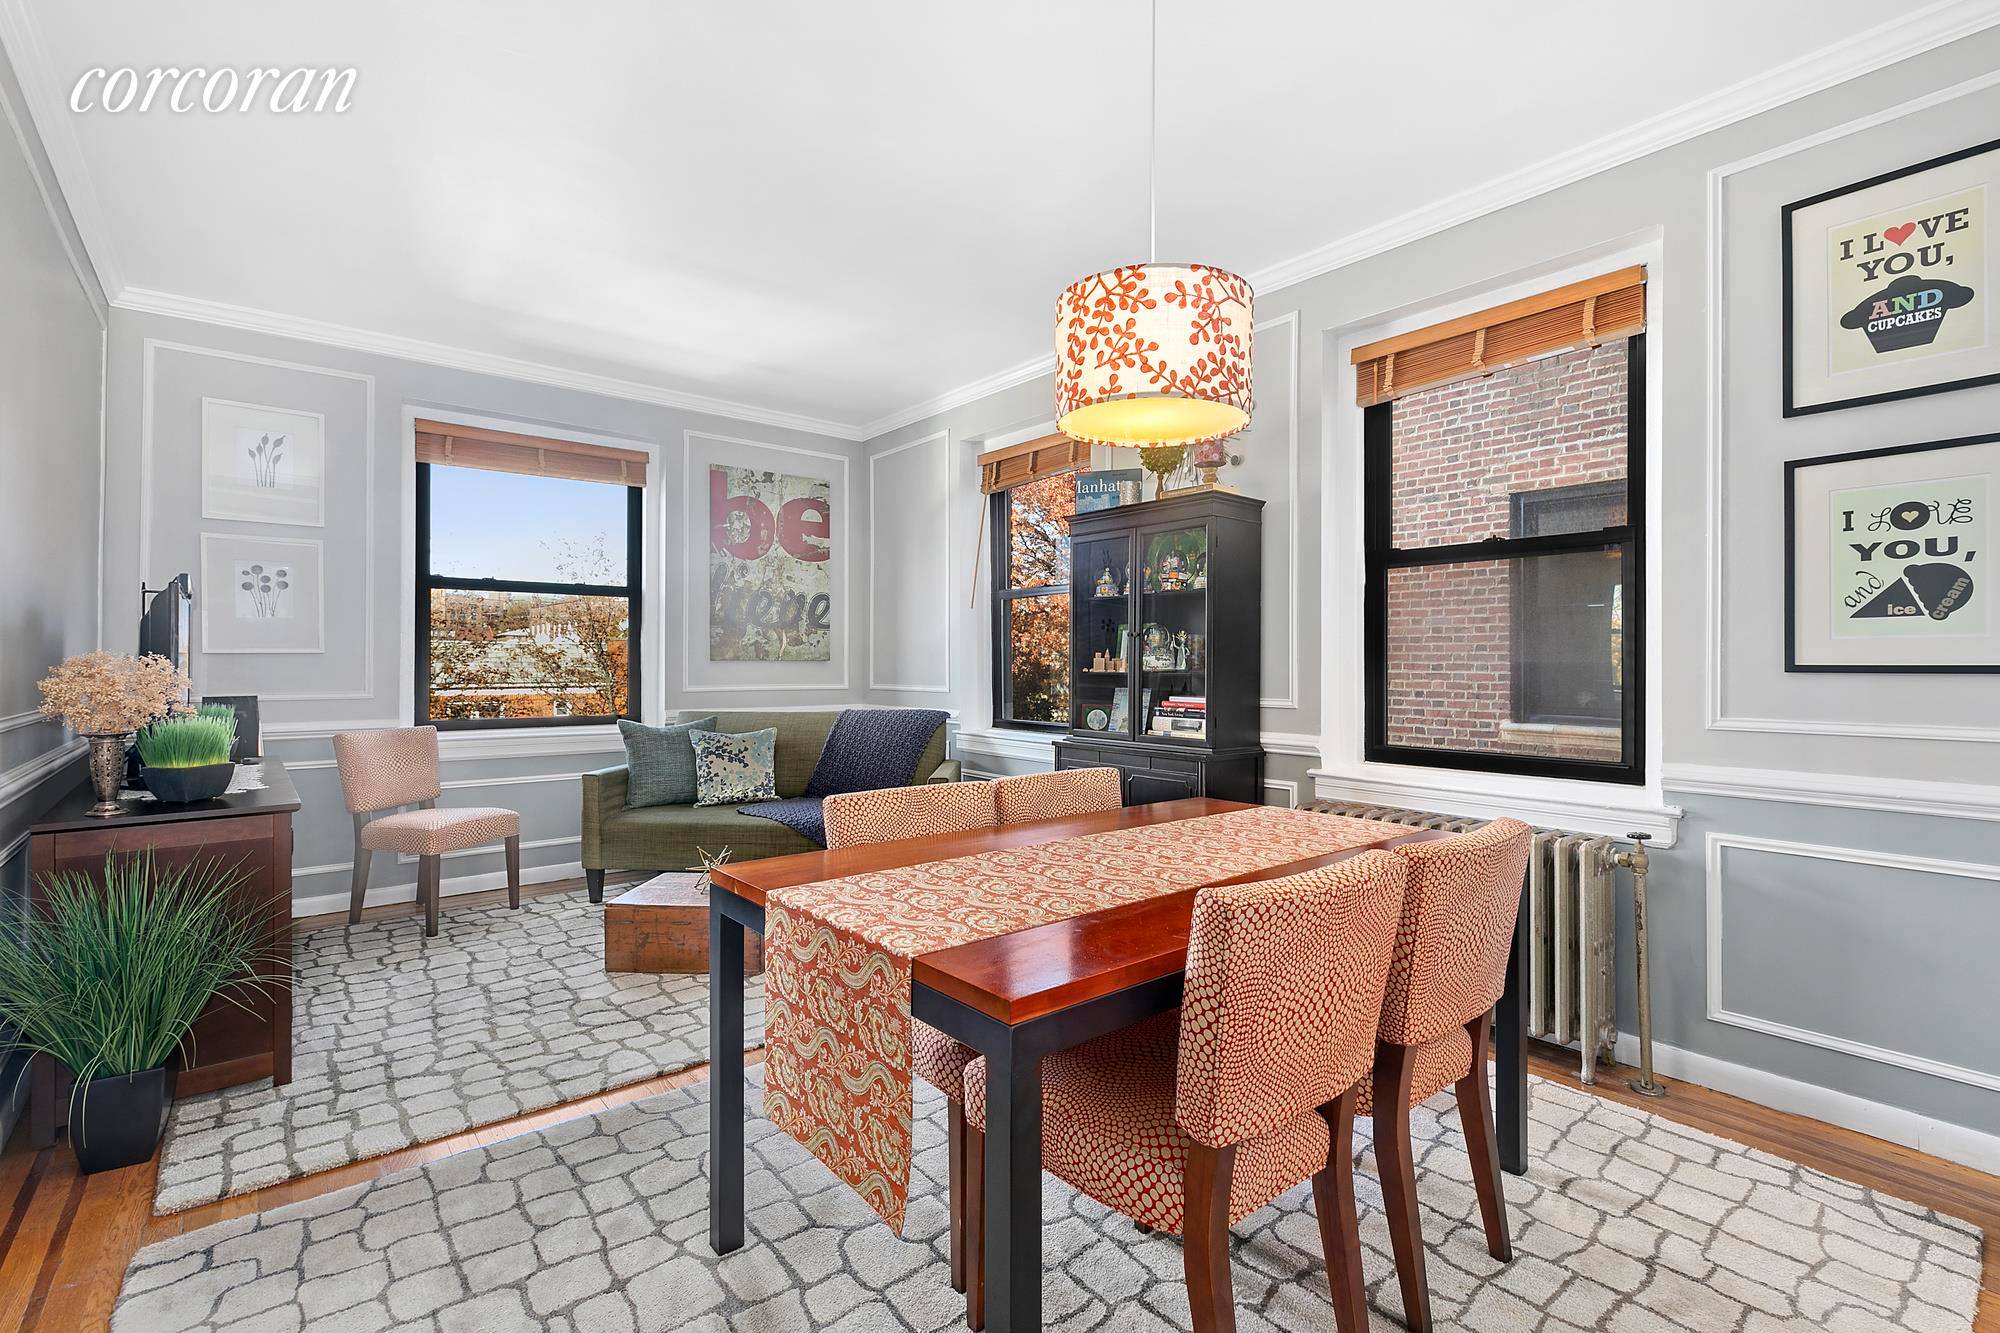 Located at 85 11 Lefferts Boulevard, an intimate pre war cooperative, this 2 BR 1 BA home is bright and airy.